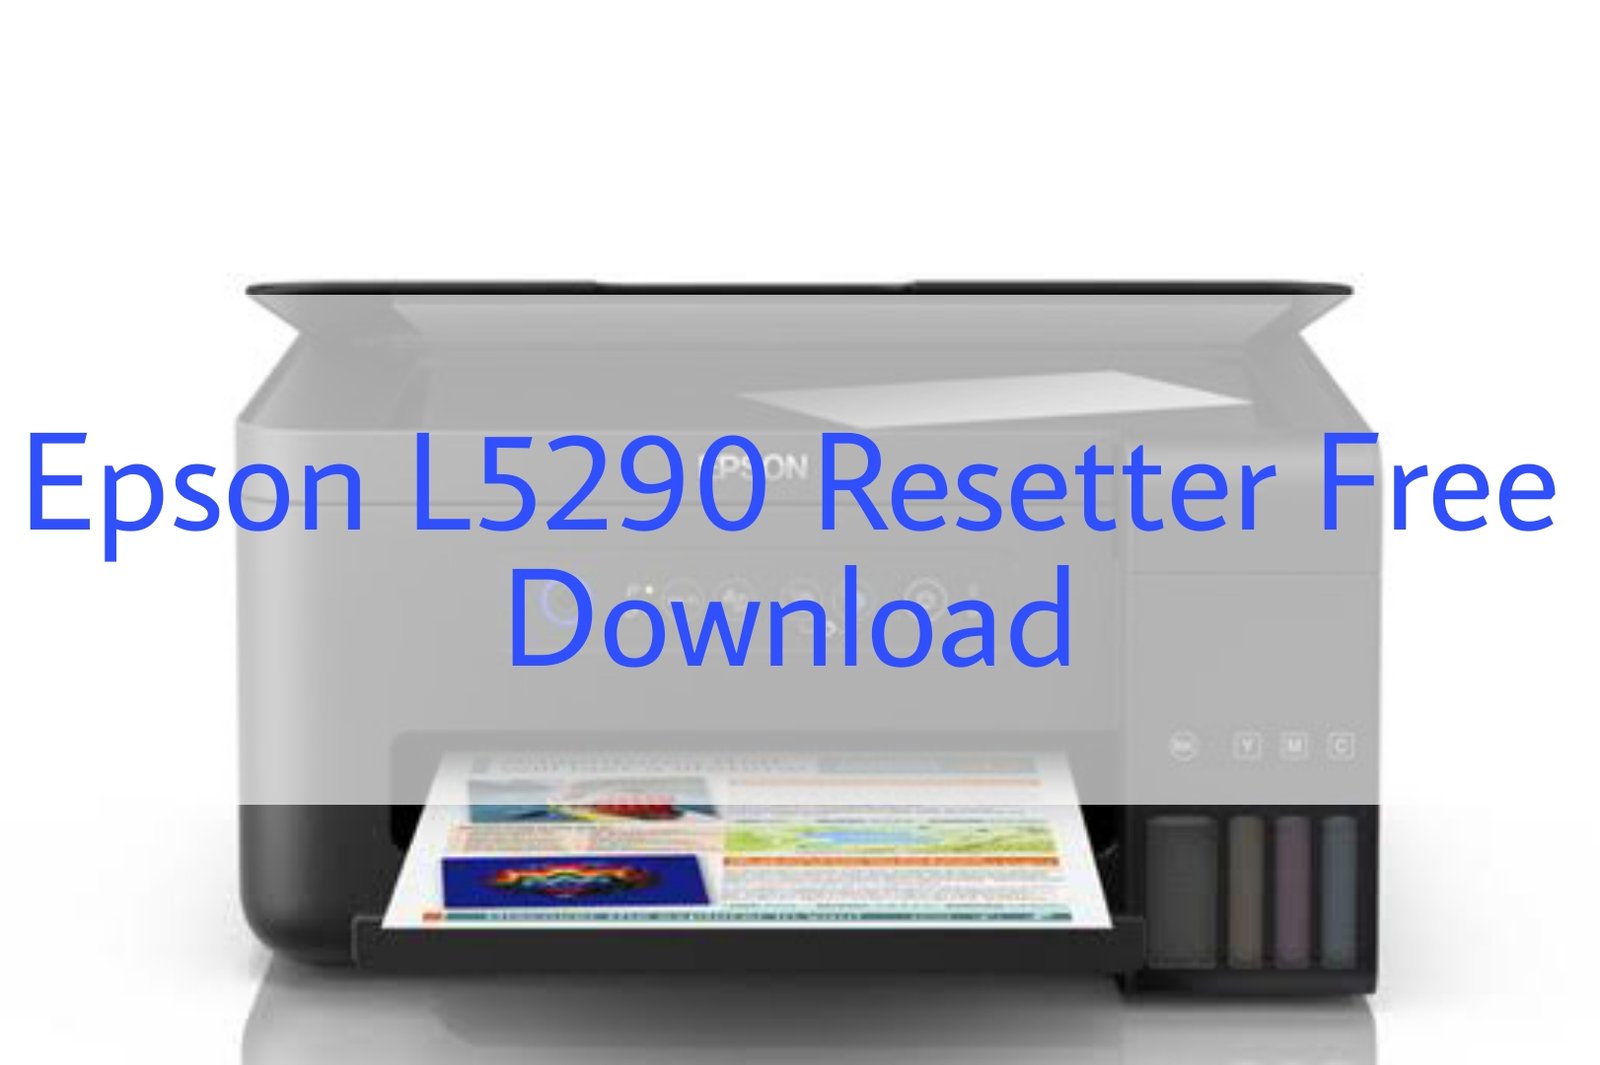 Epson L5290 Resetter Free Download 3156